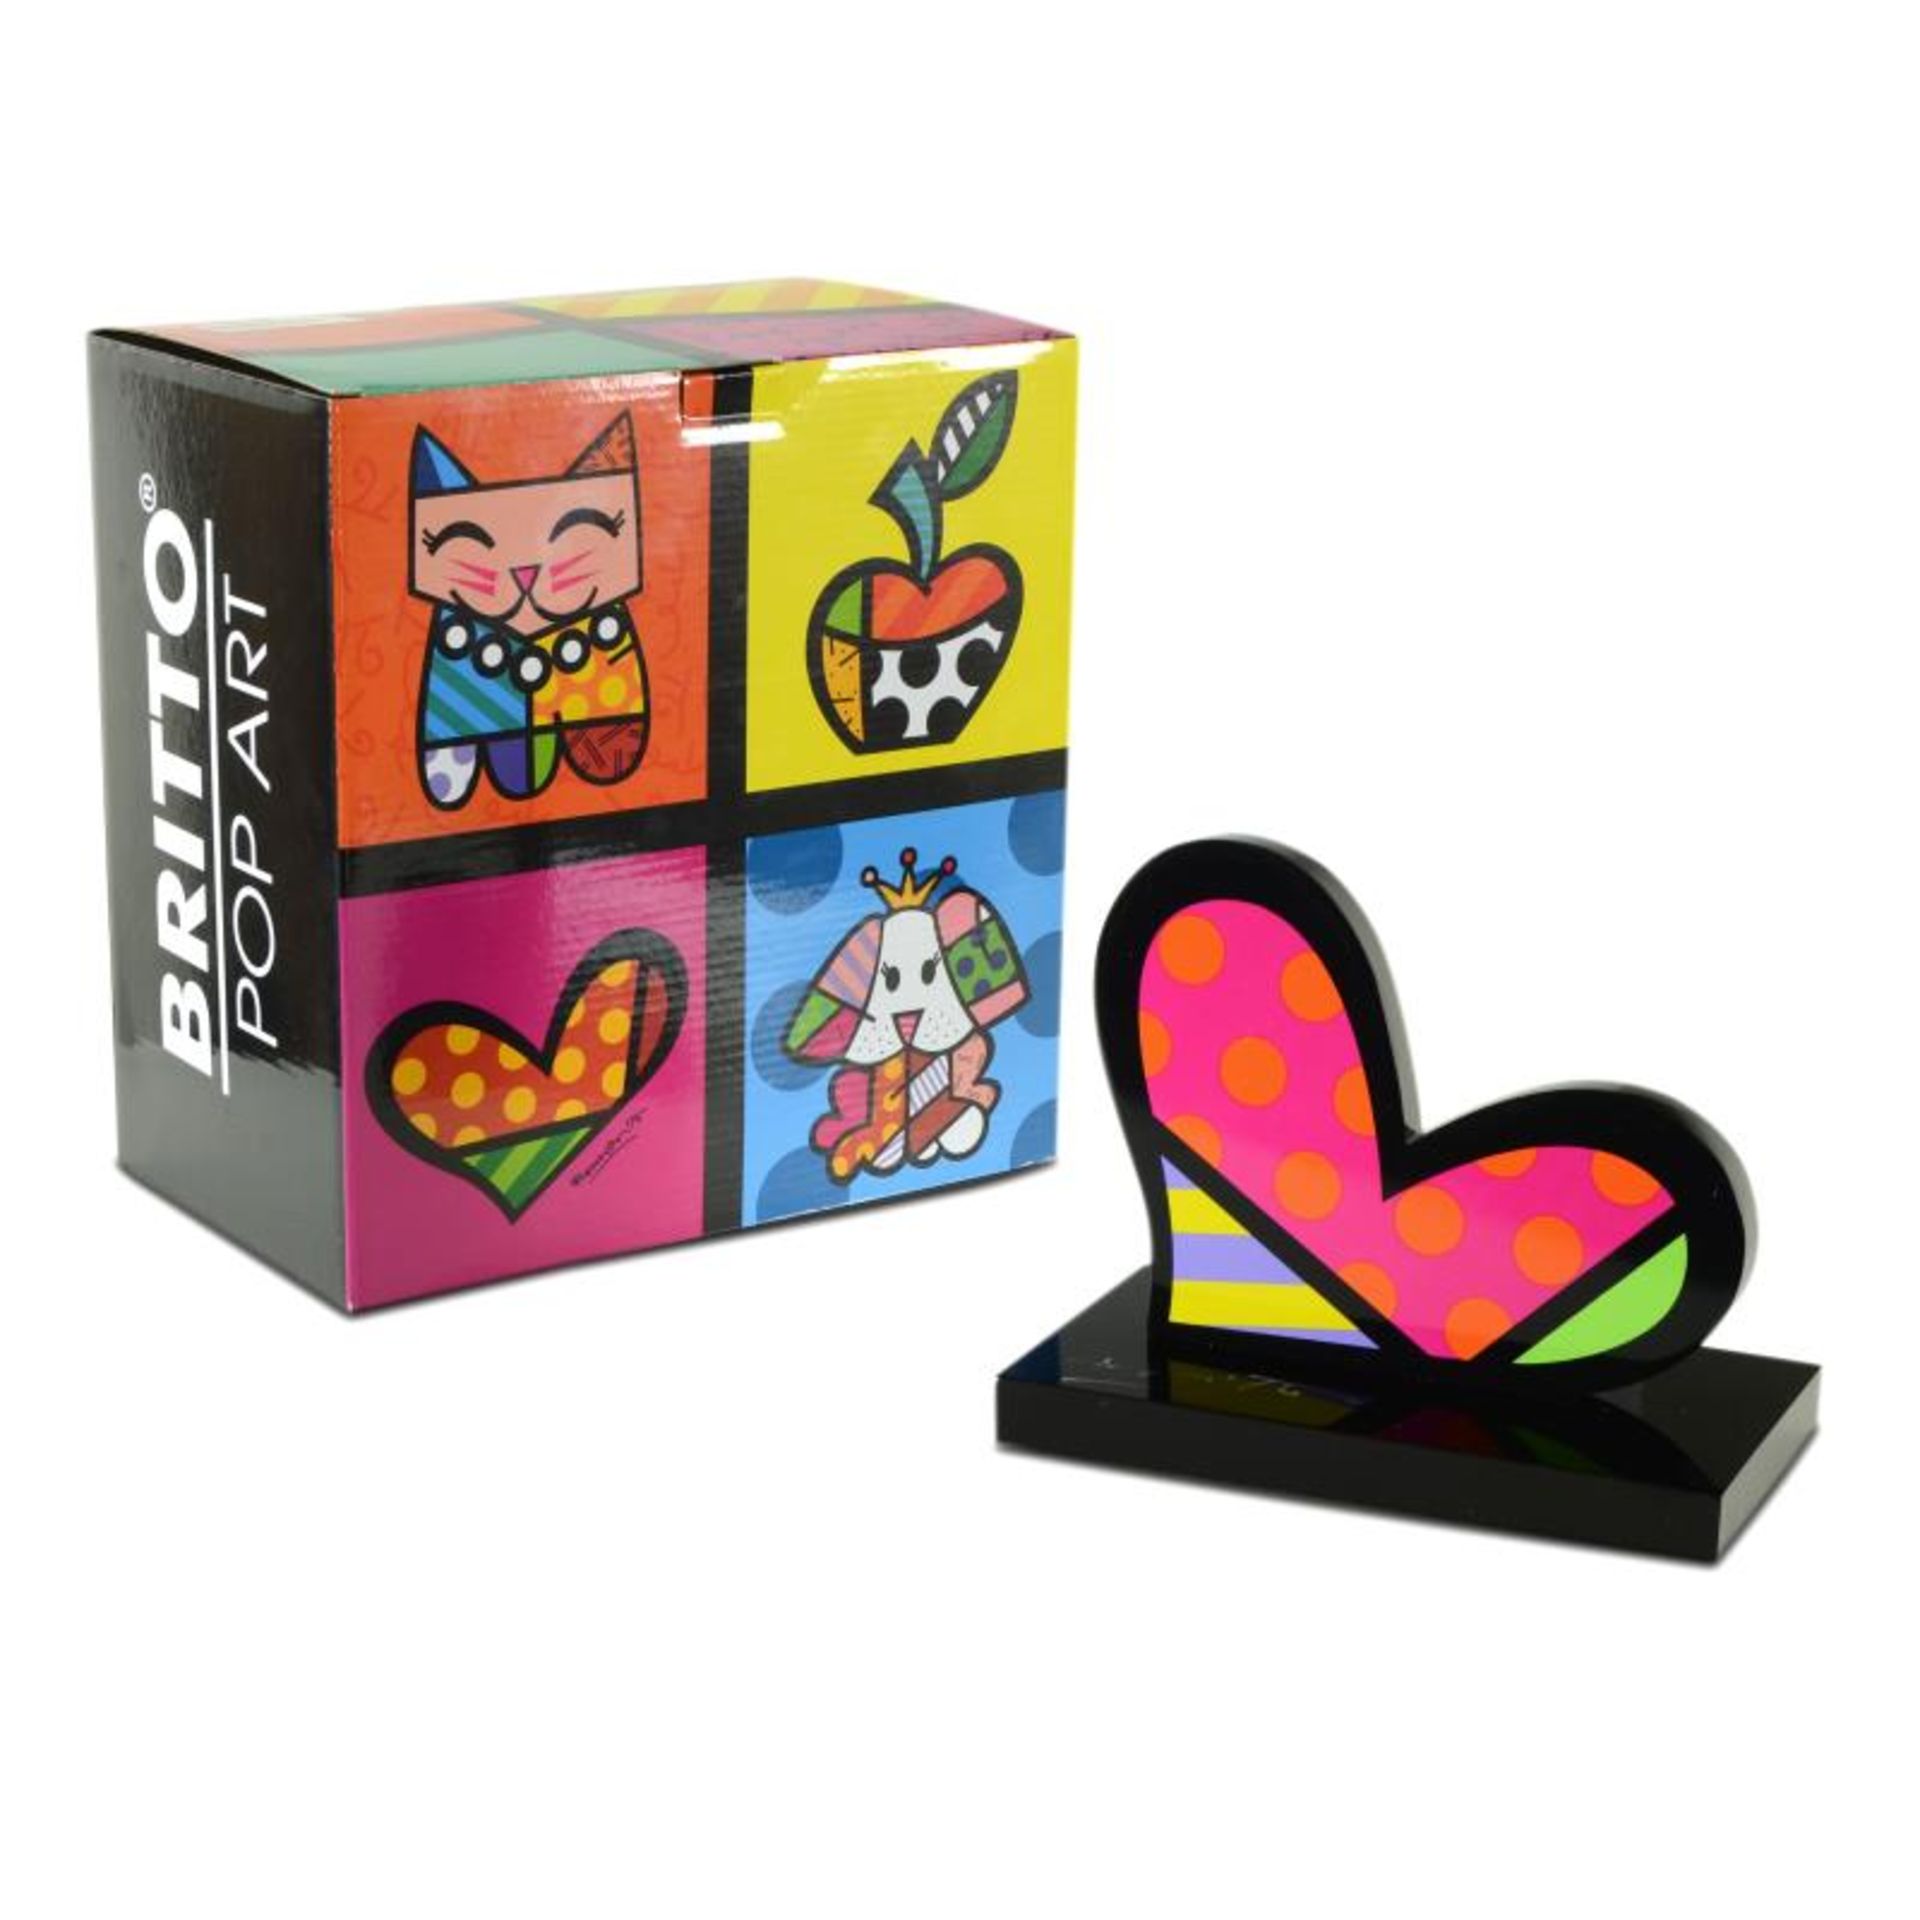 For You by Britto, Romero - Image 3 of 3